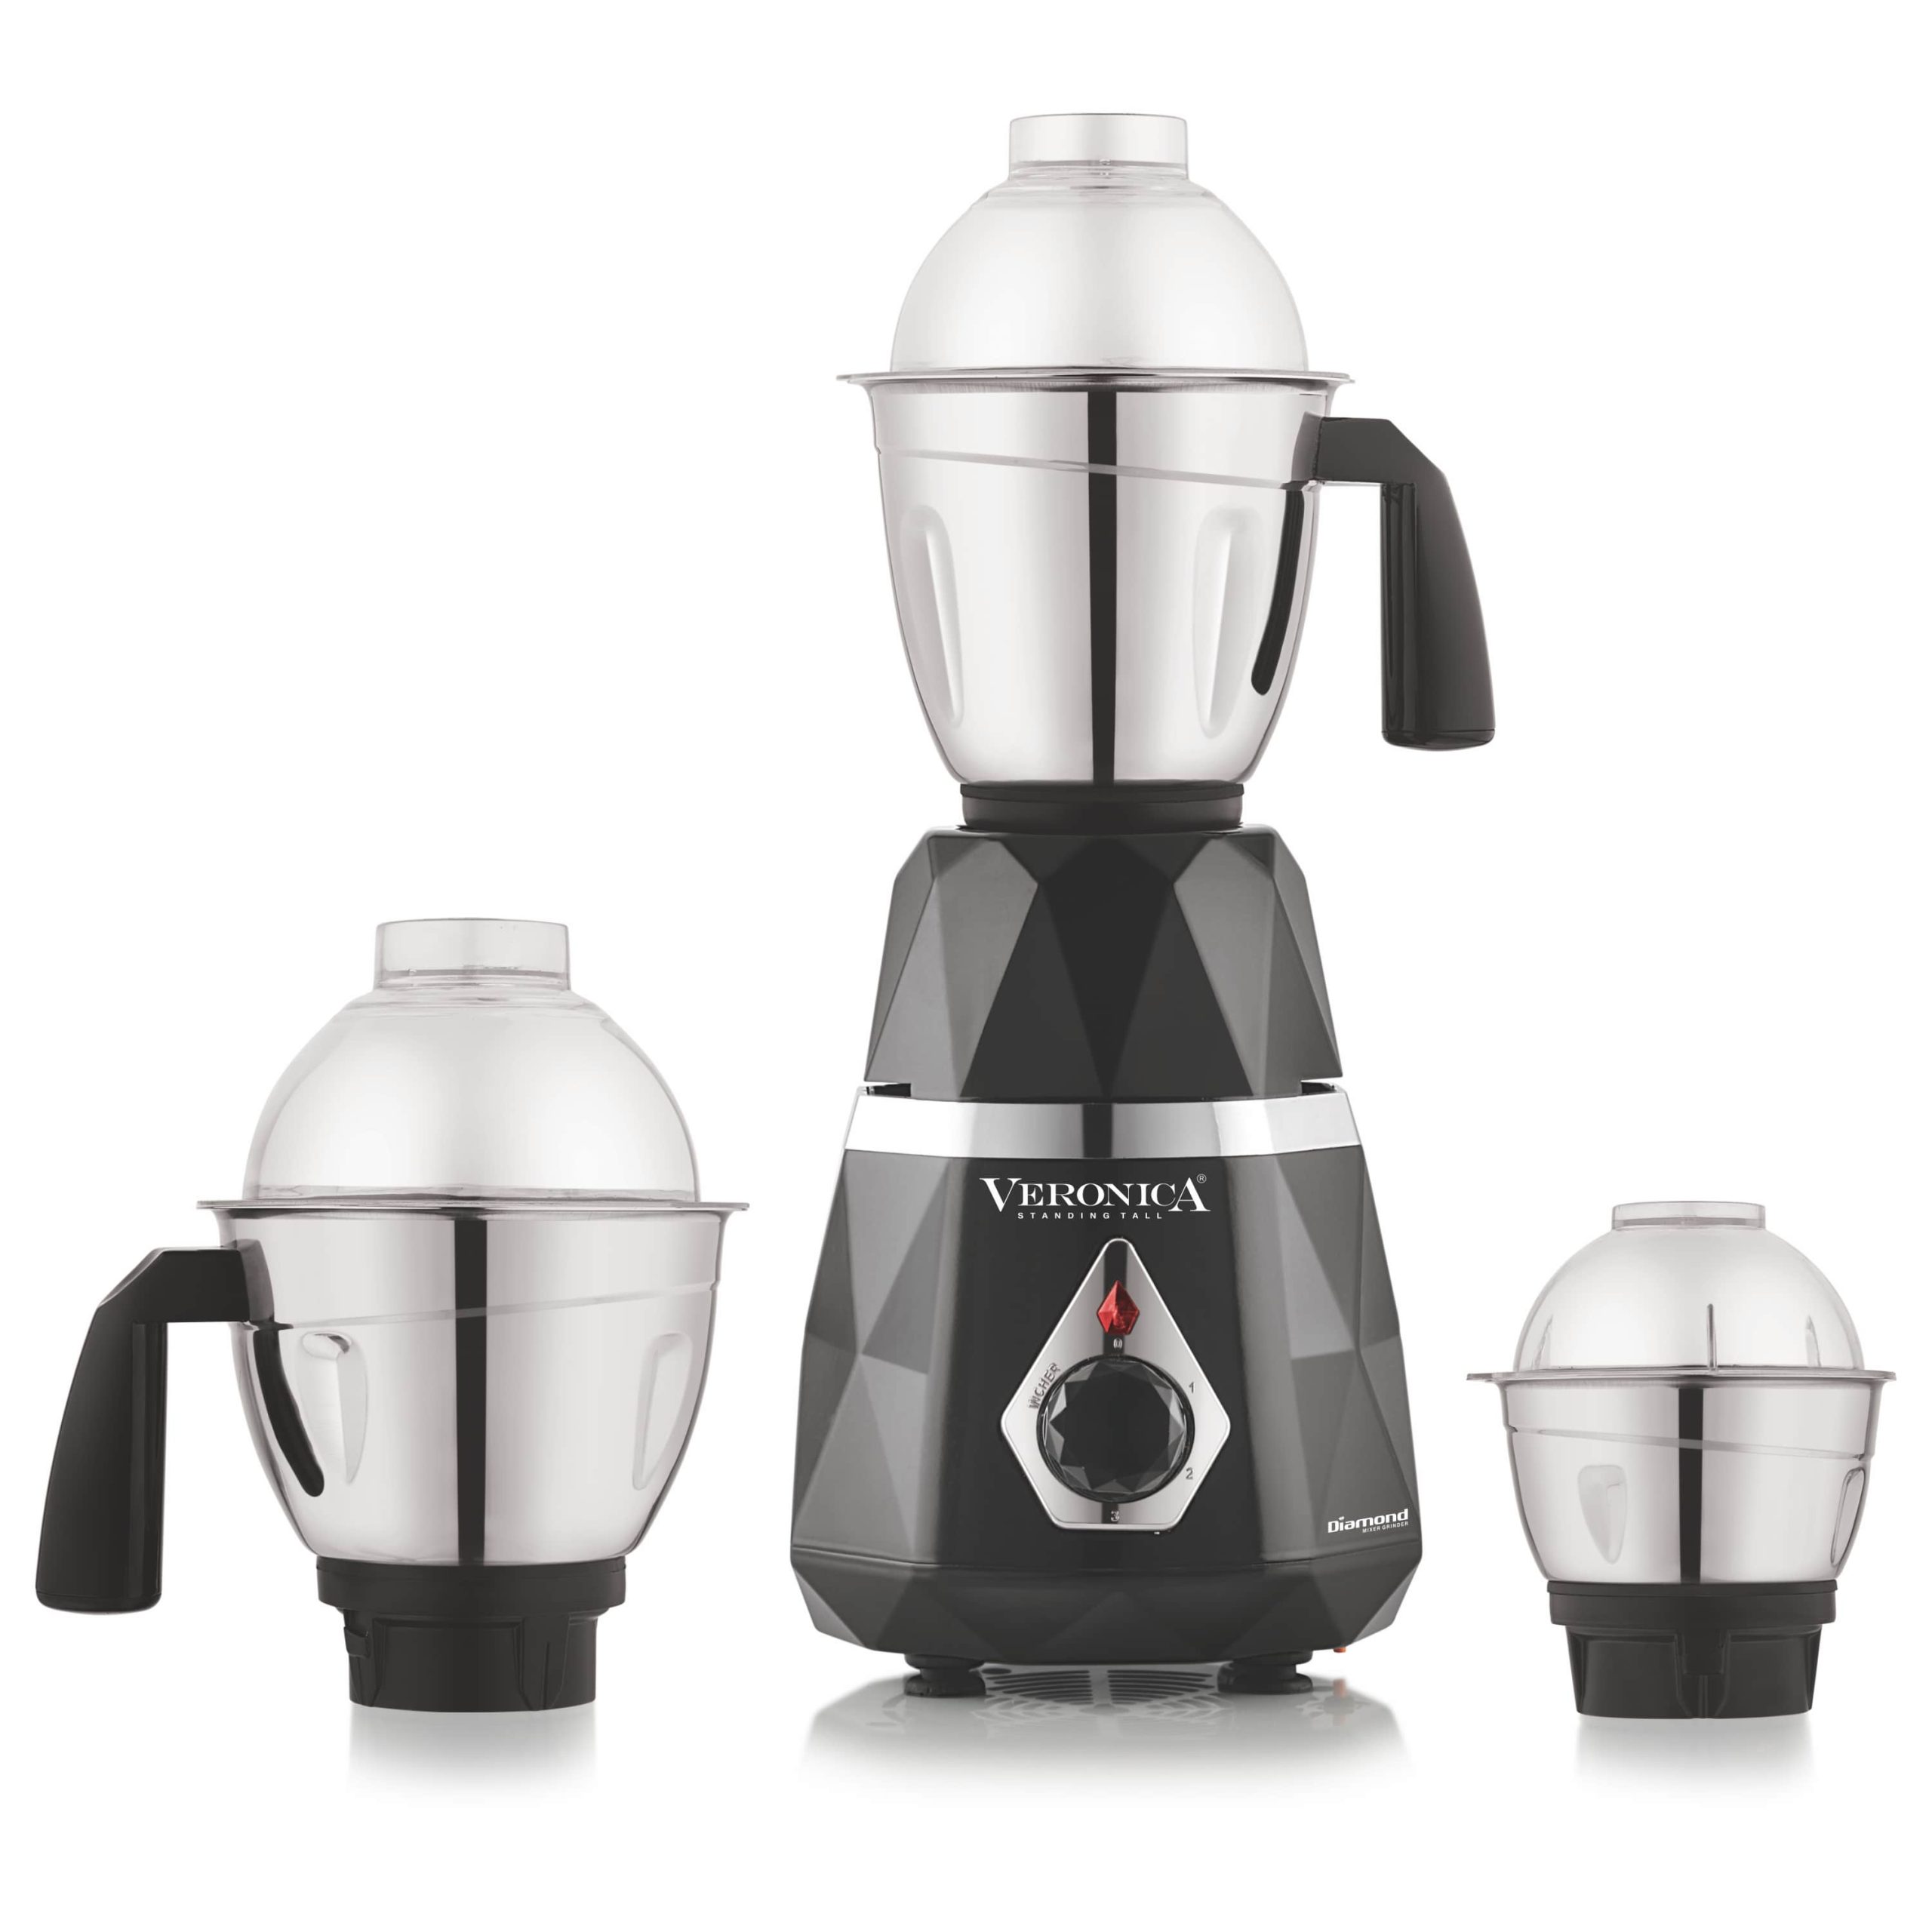 Veronica Diamond Mixer Grinder 1HP- with 3 Stainless Steel Jars (For Dry Grinding, Wet Grinding, Chutneys, 2 years warranty, Black